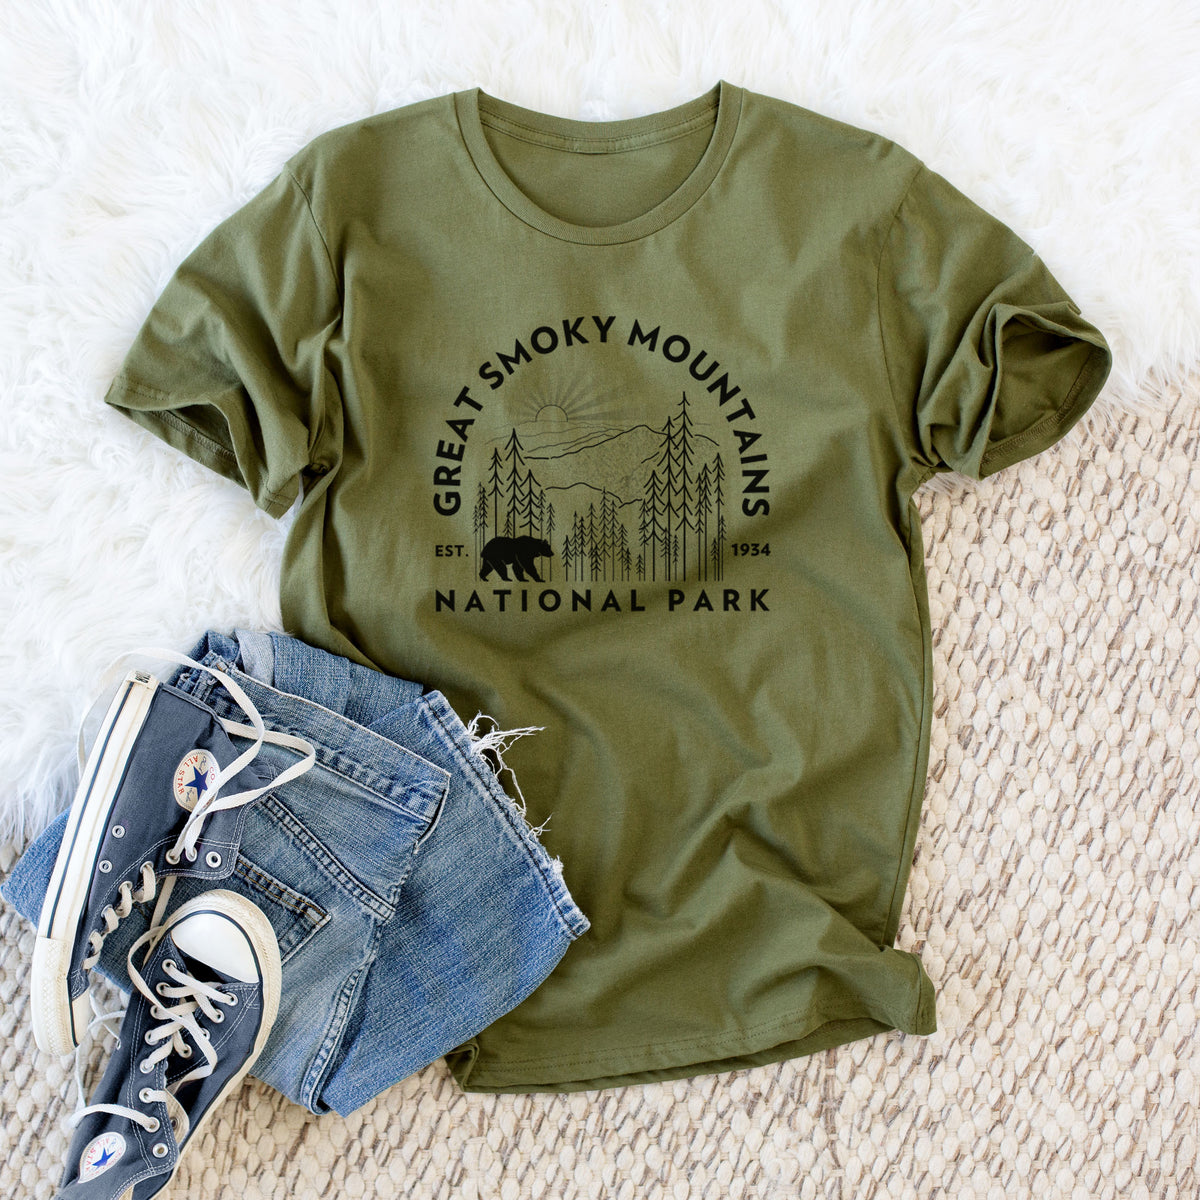 Great Smoky Mountains National Park - Unisex Crewneck - Made in USA - 100% Organic Cotton